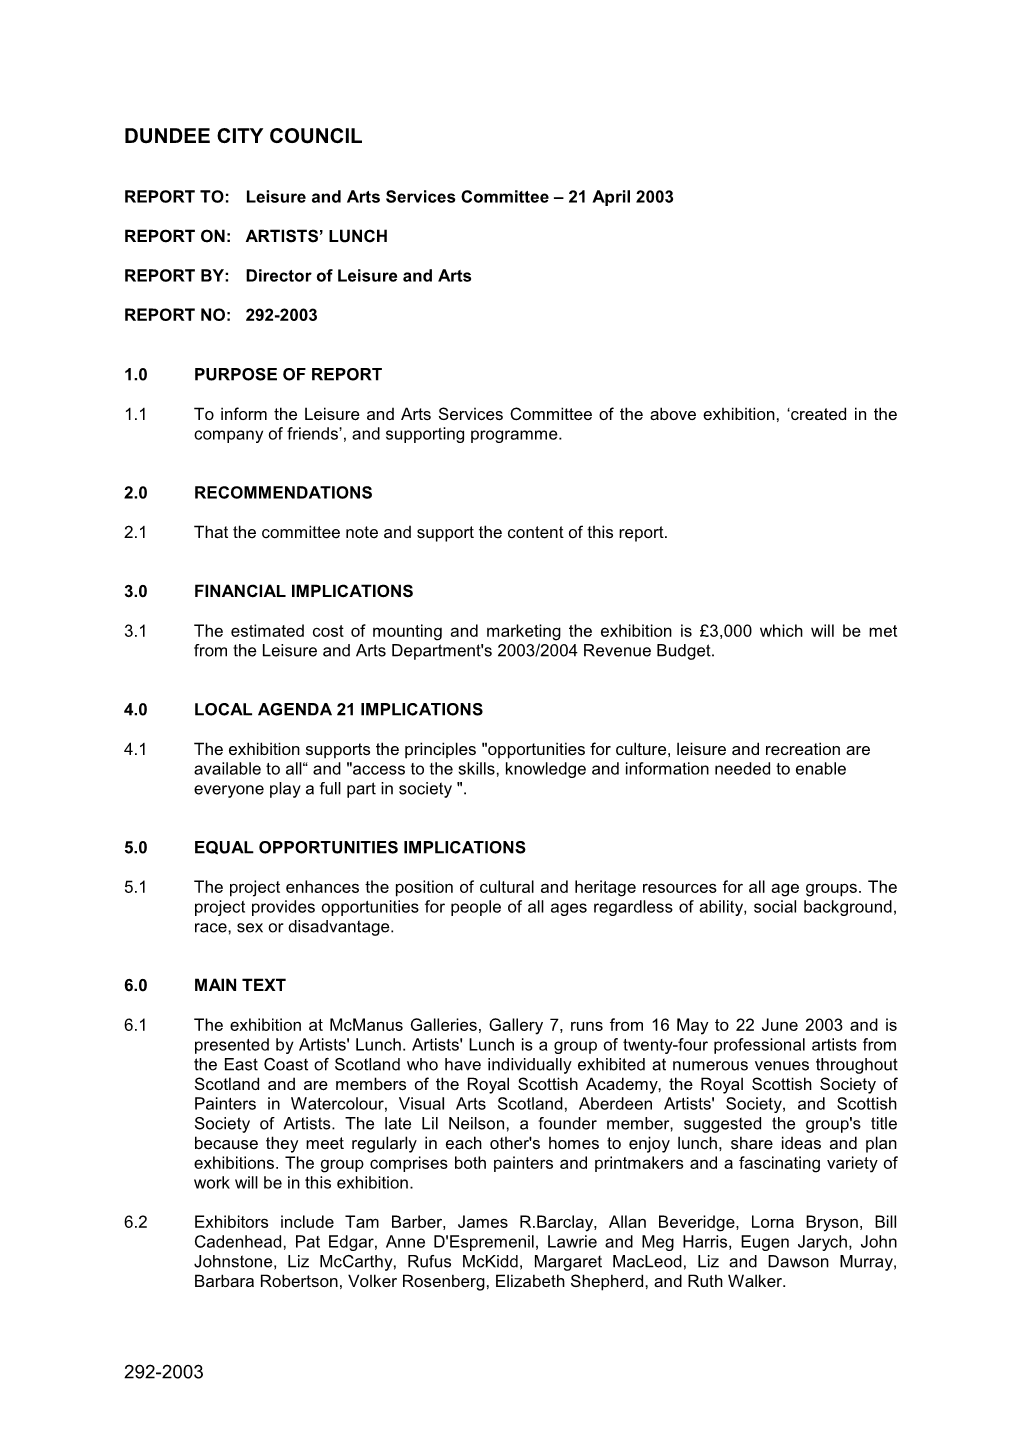 REPORT TO: Leisure and Arts Services Committee – 21 April 2003